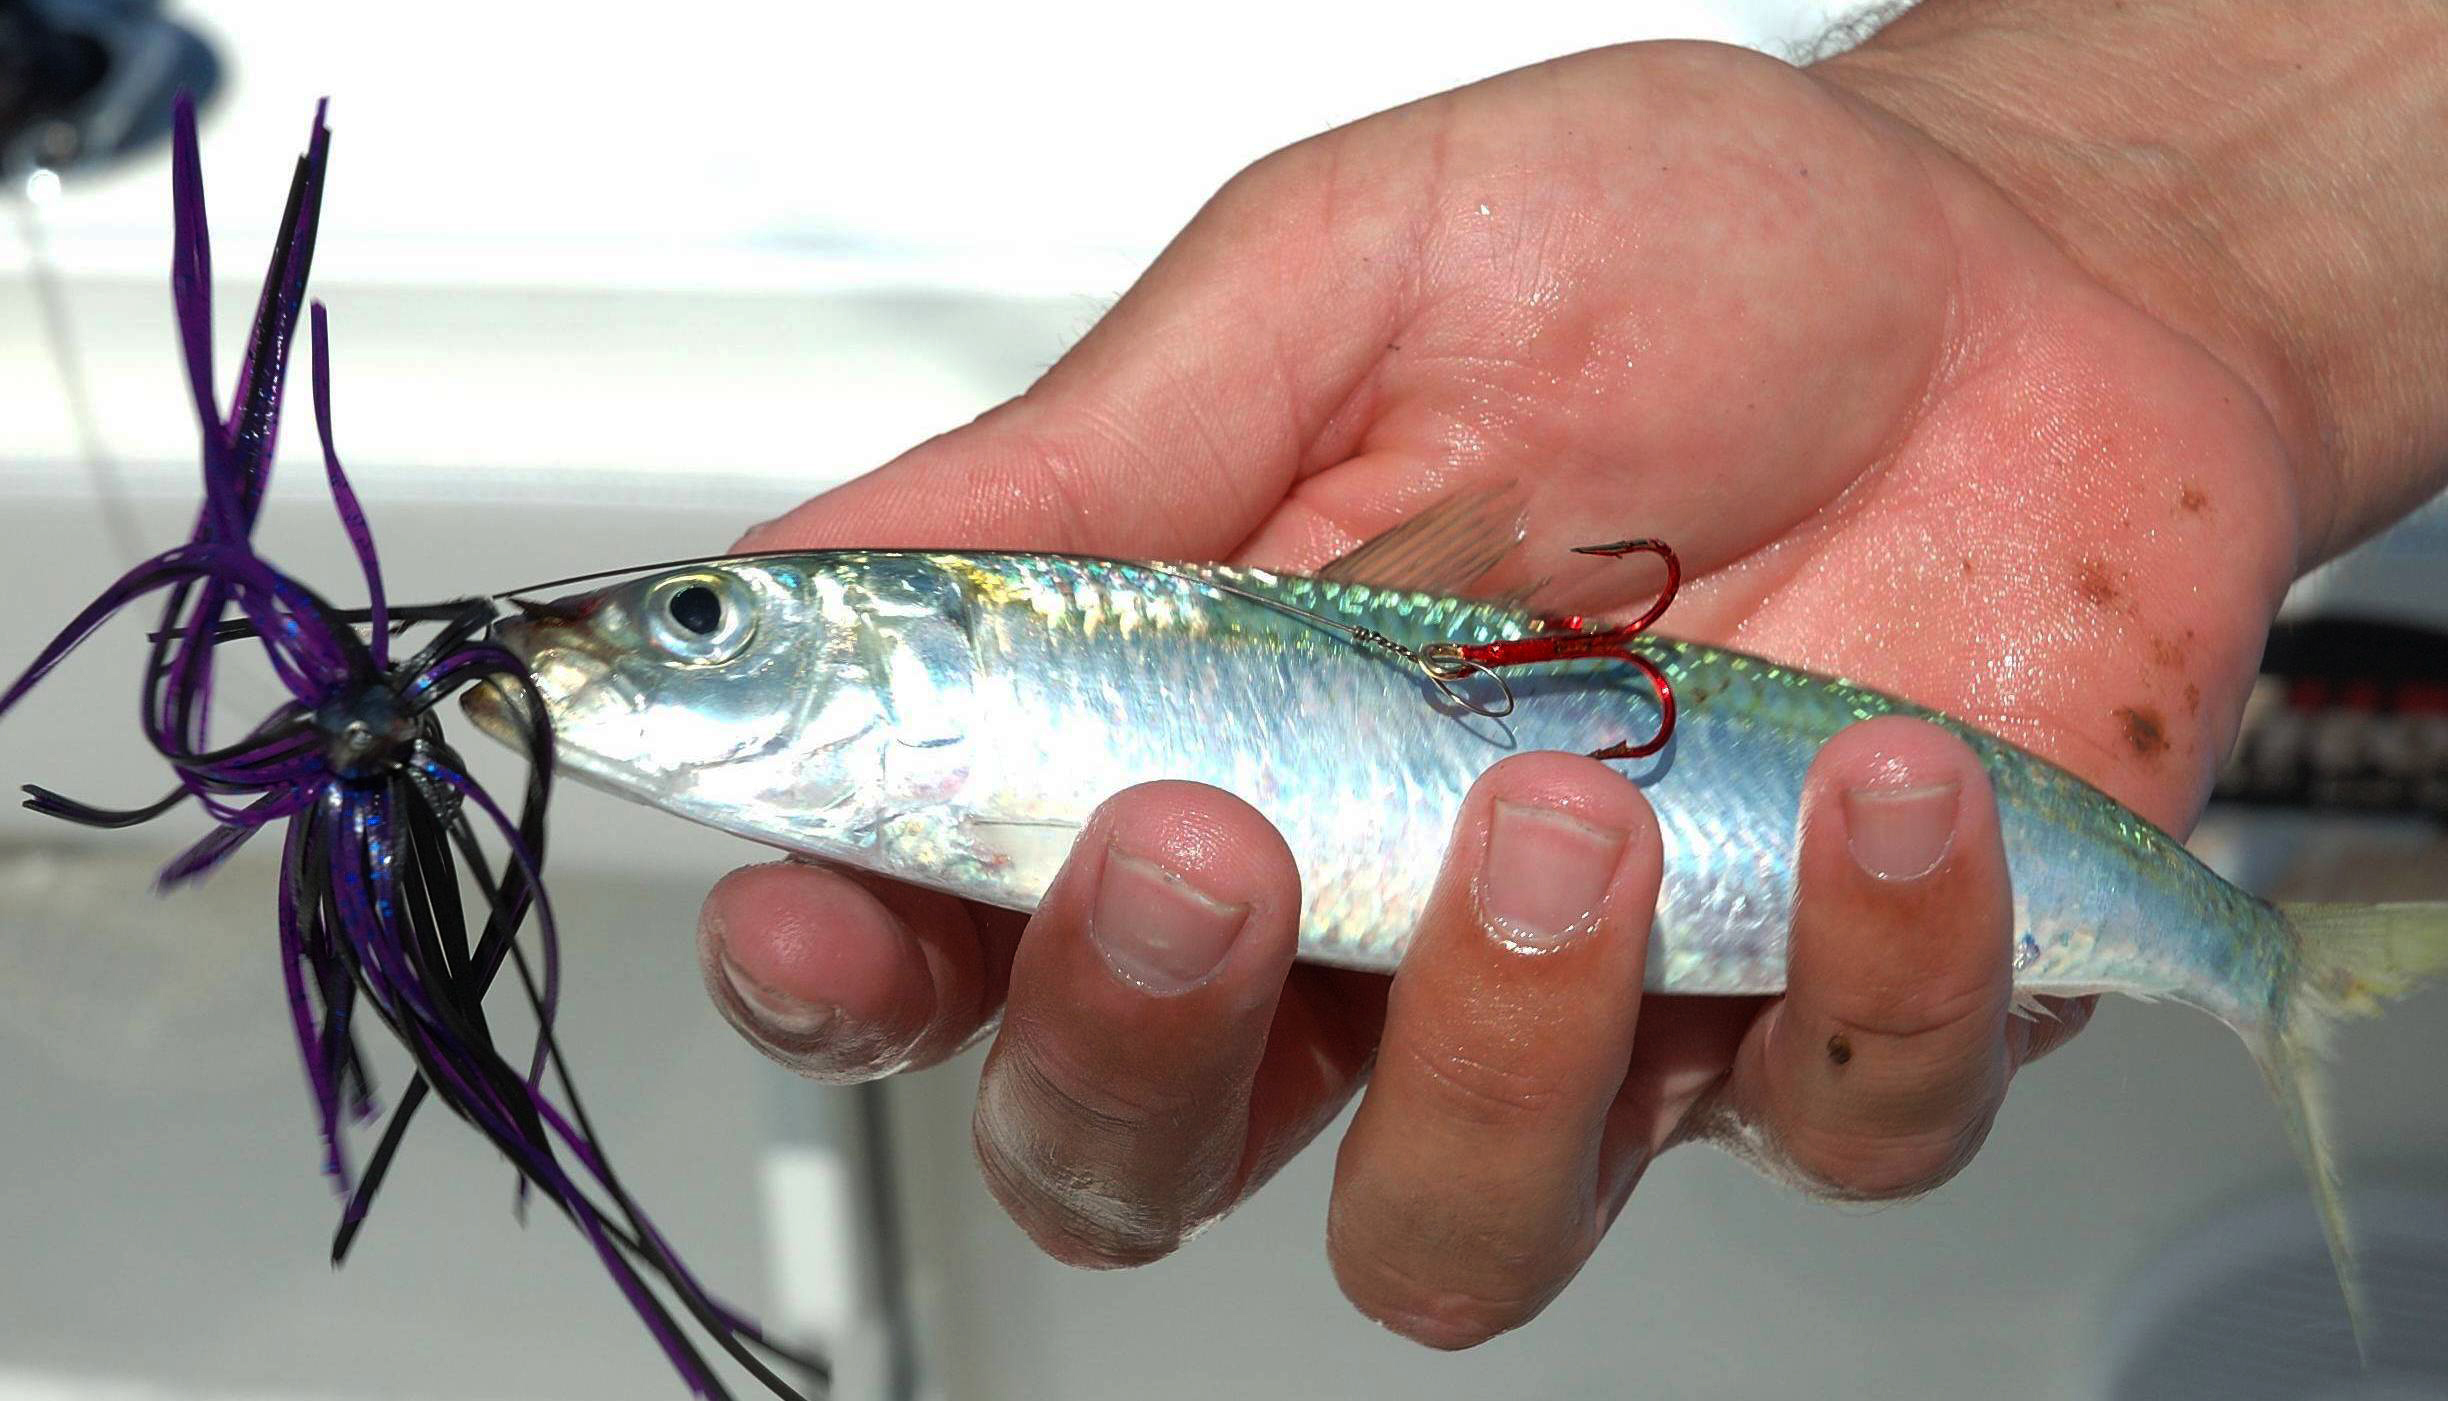 3 criteria to properly rig fishing lures with single hooks